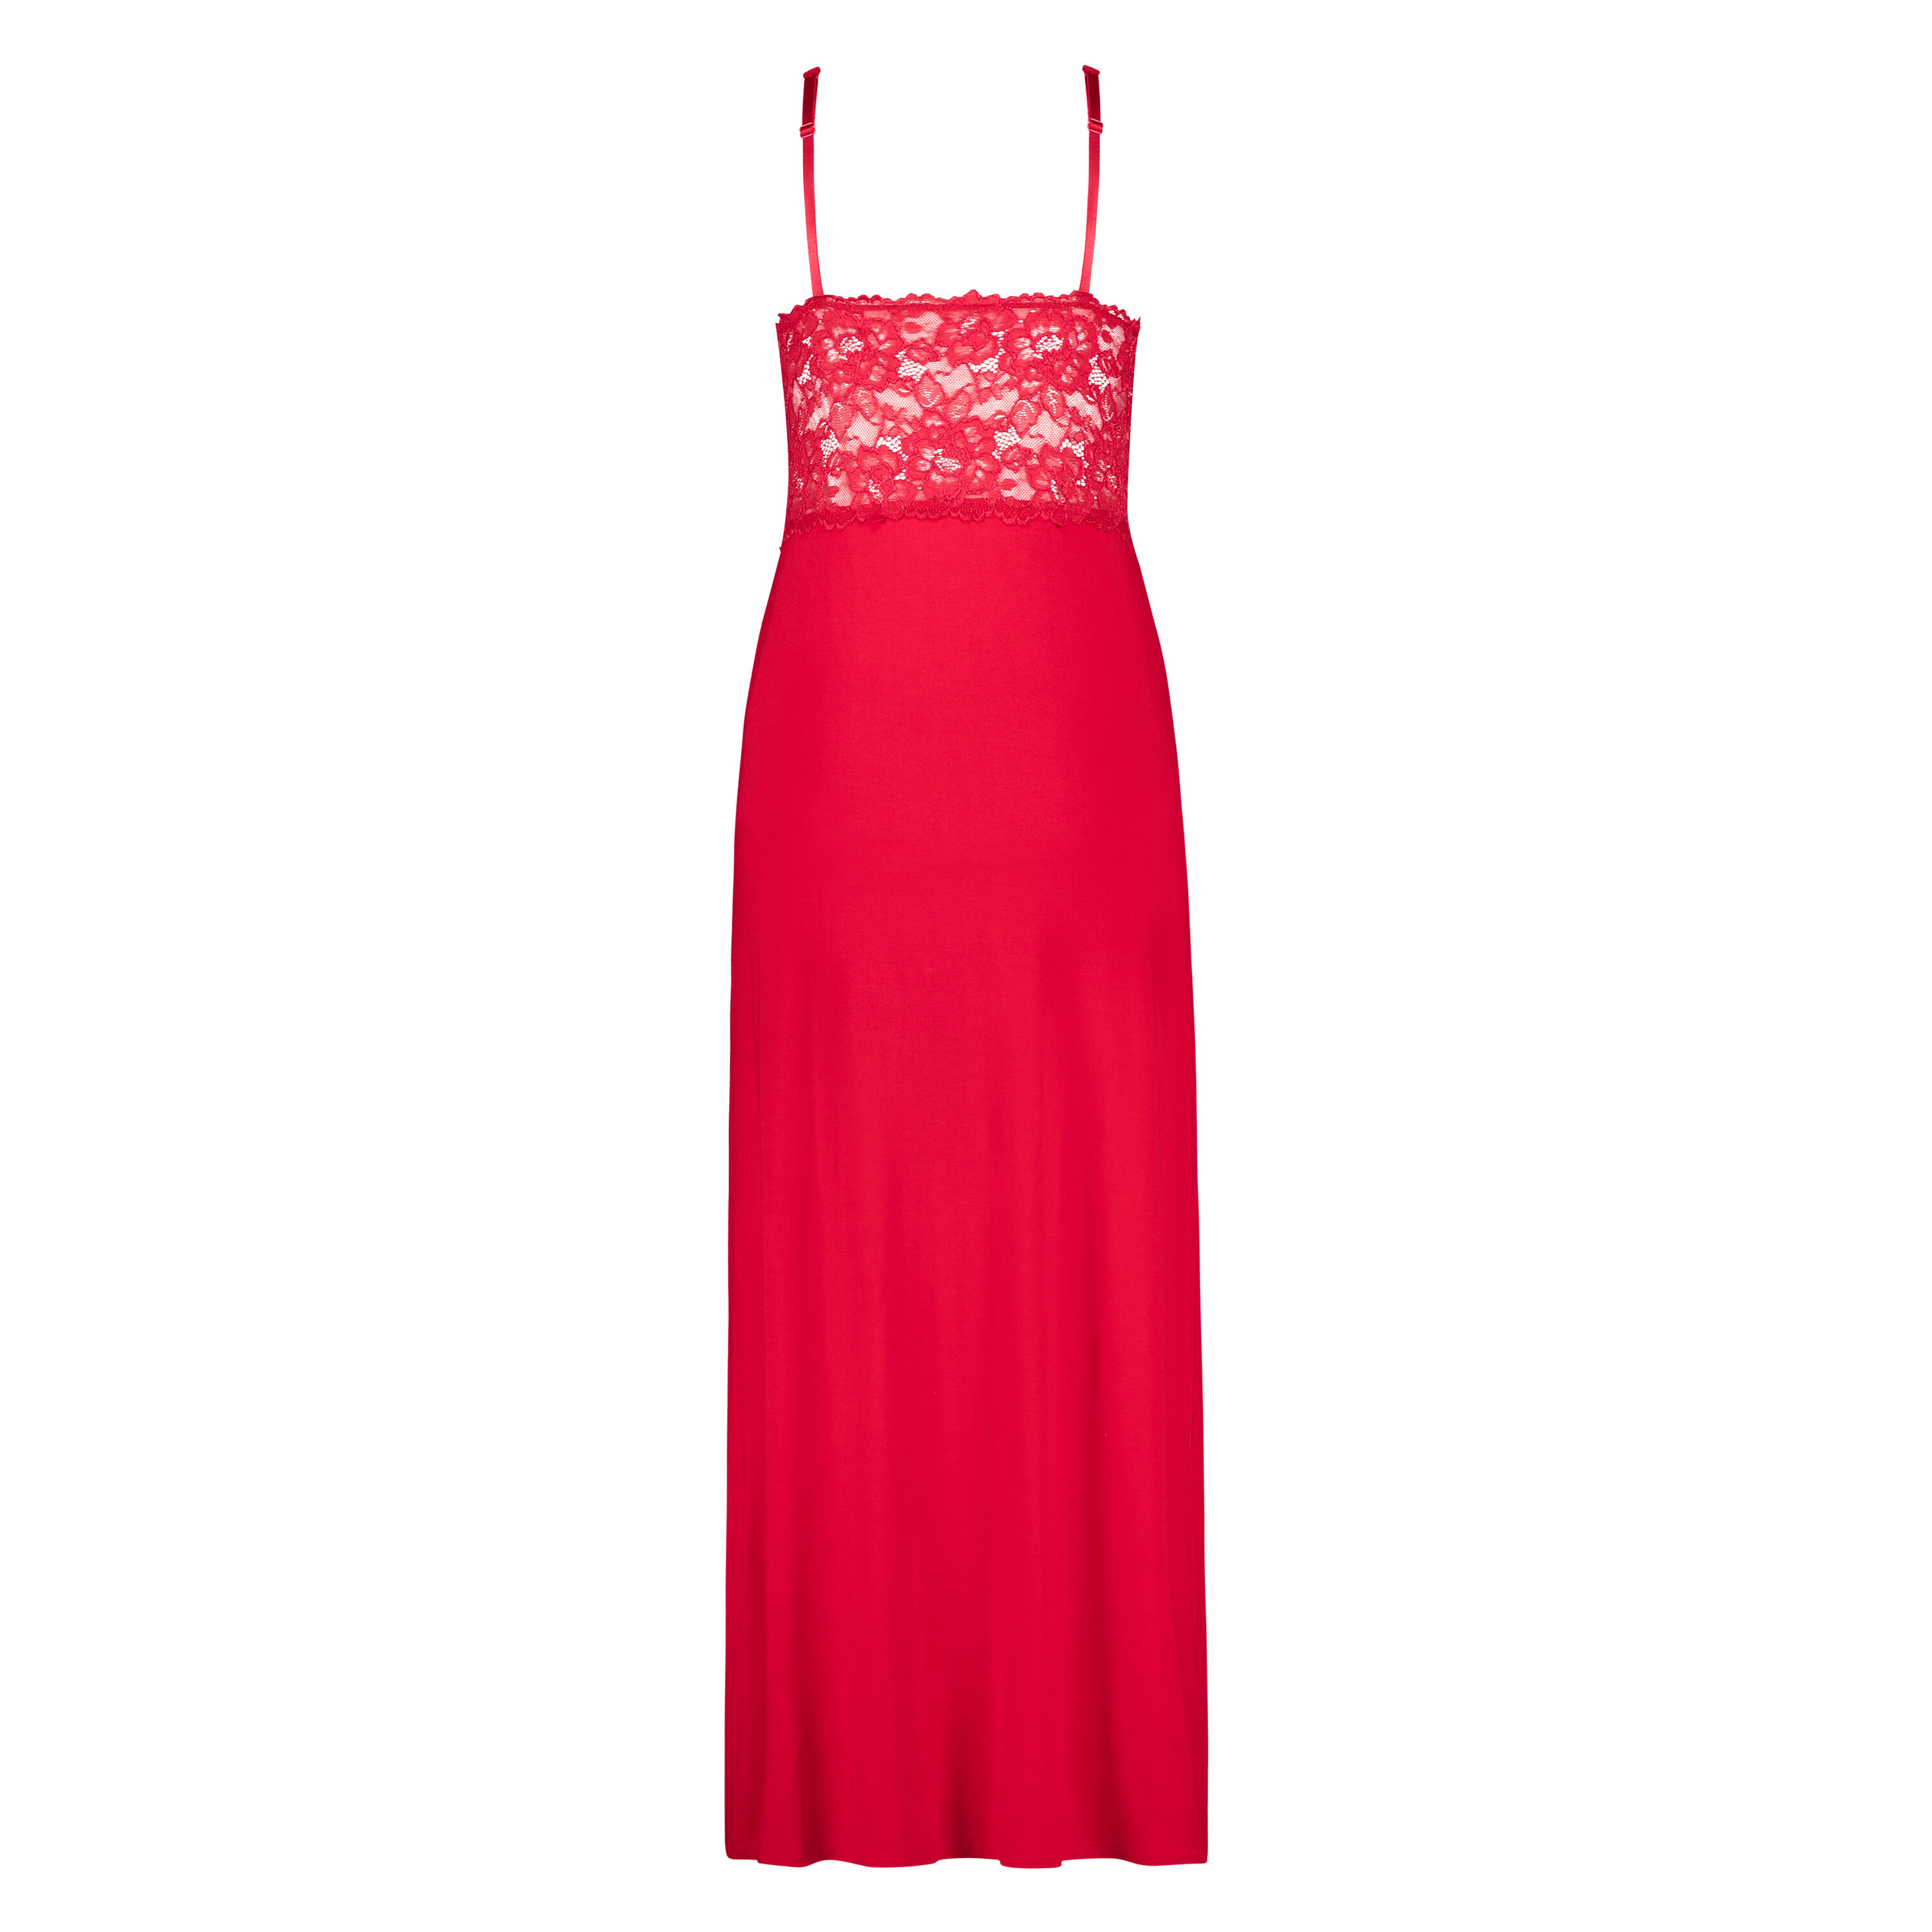 Nora Lace Long Slip Dress for €34.99 ...